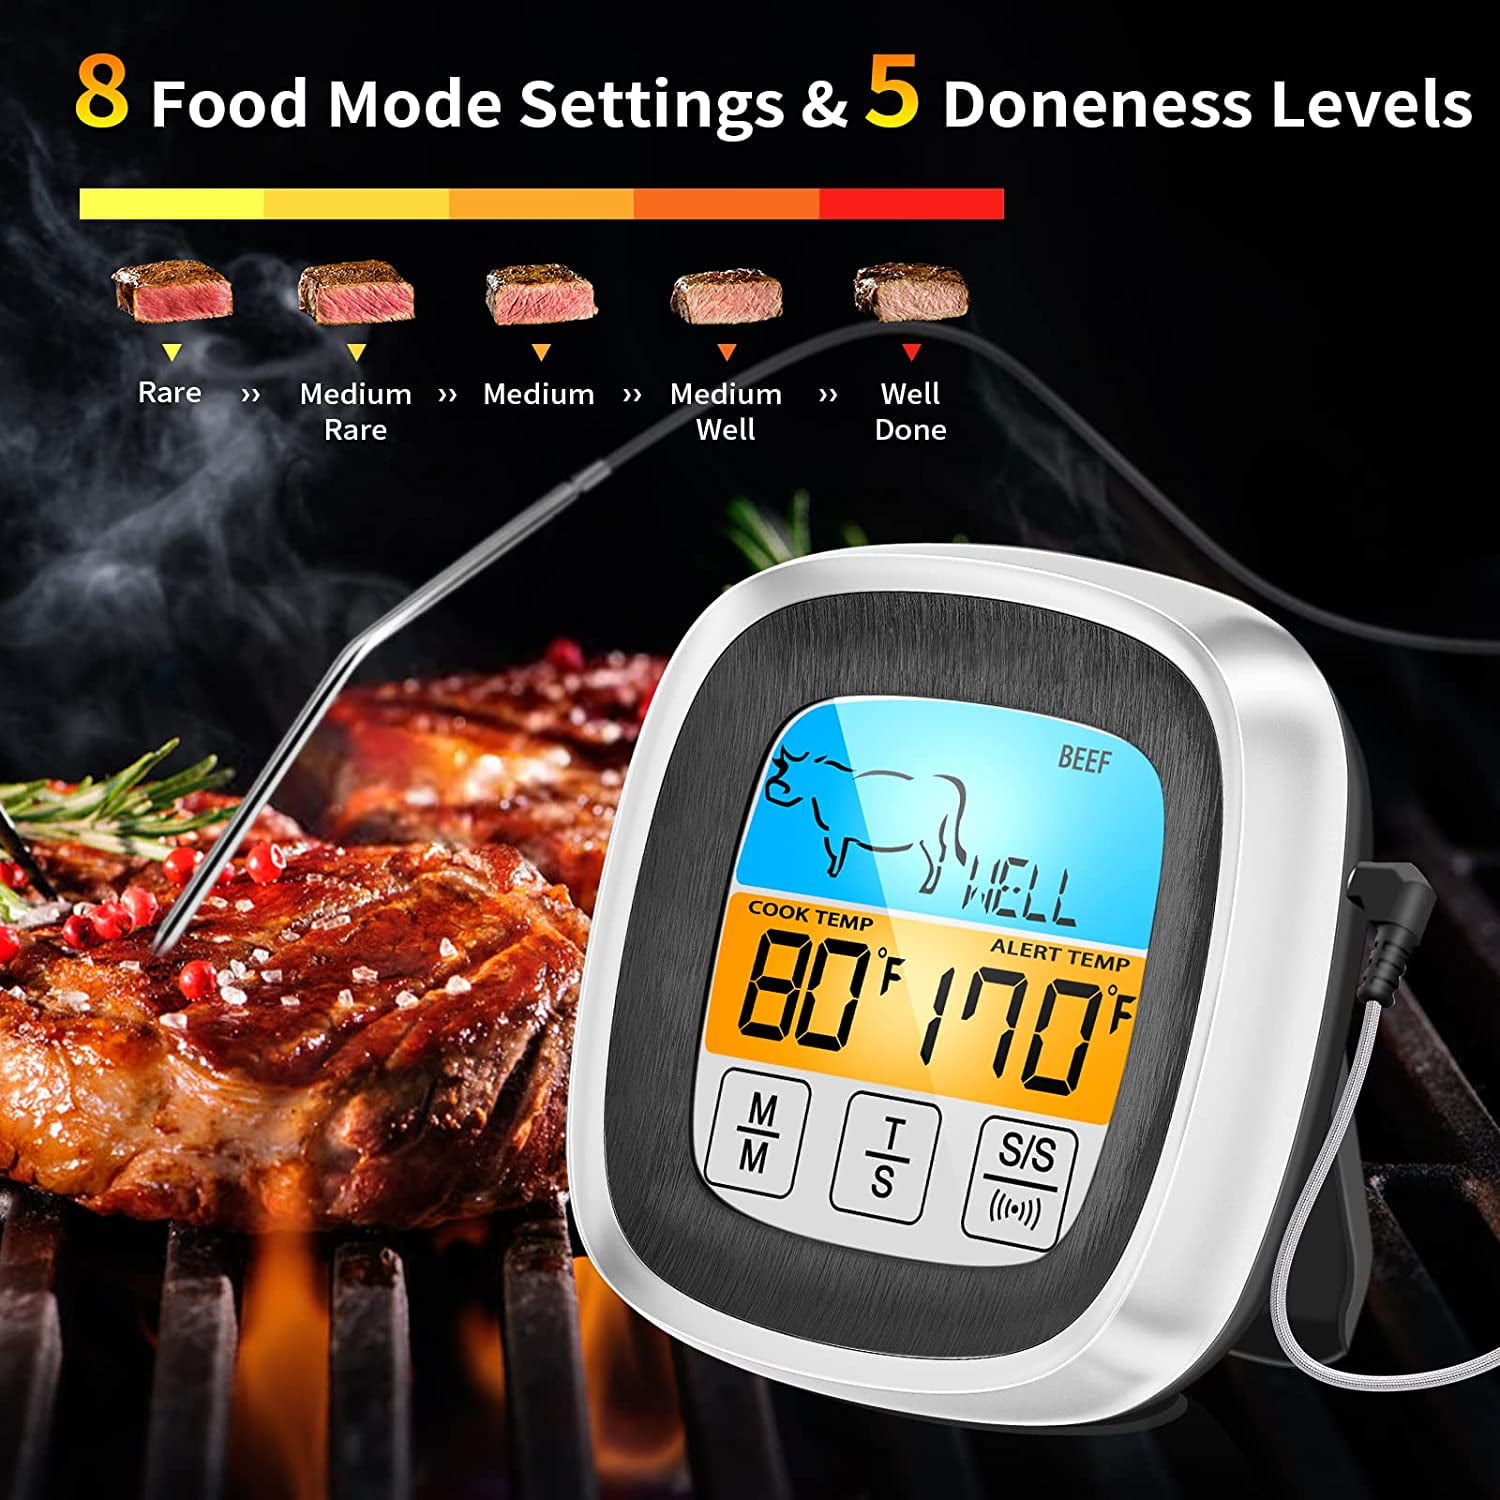 Sarkoyar Food Thermometer LCD Large Screen Digital Display Food Grade Stainless Steel Probe Fast Gauge Hand Tool BBQ Meat Cake Food Temperature